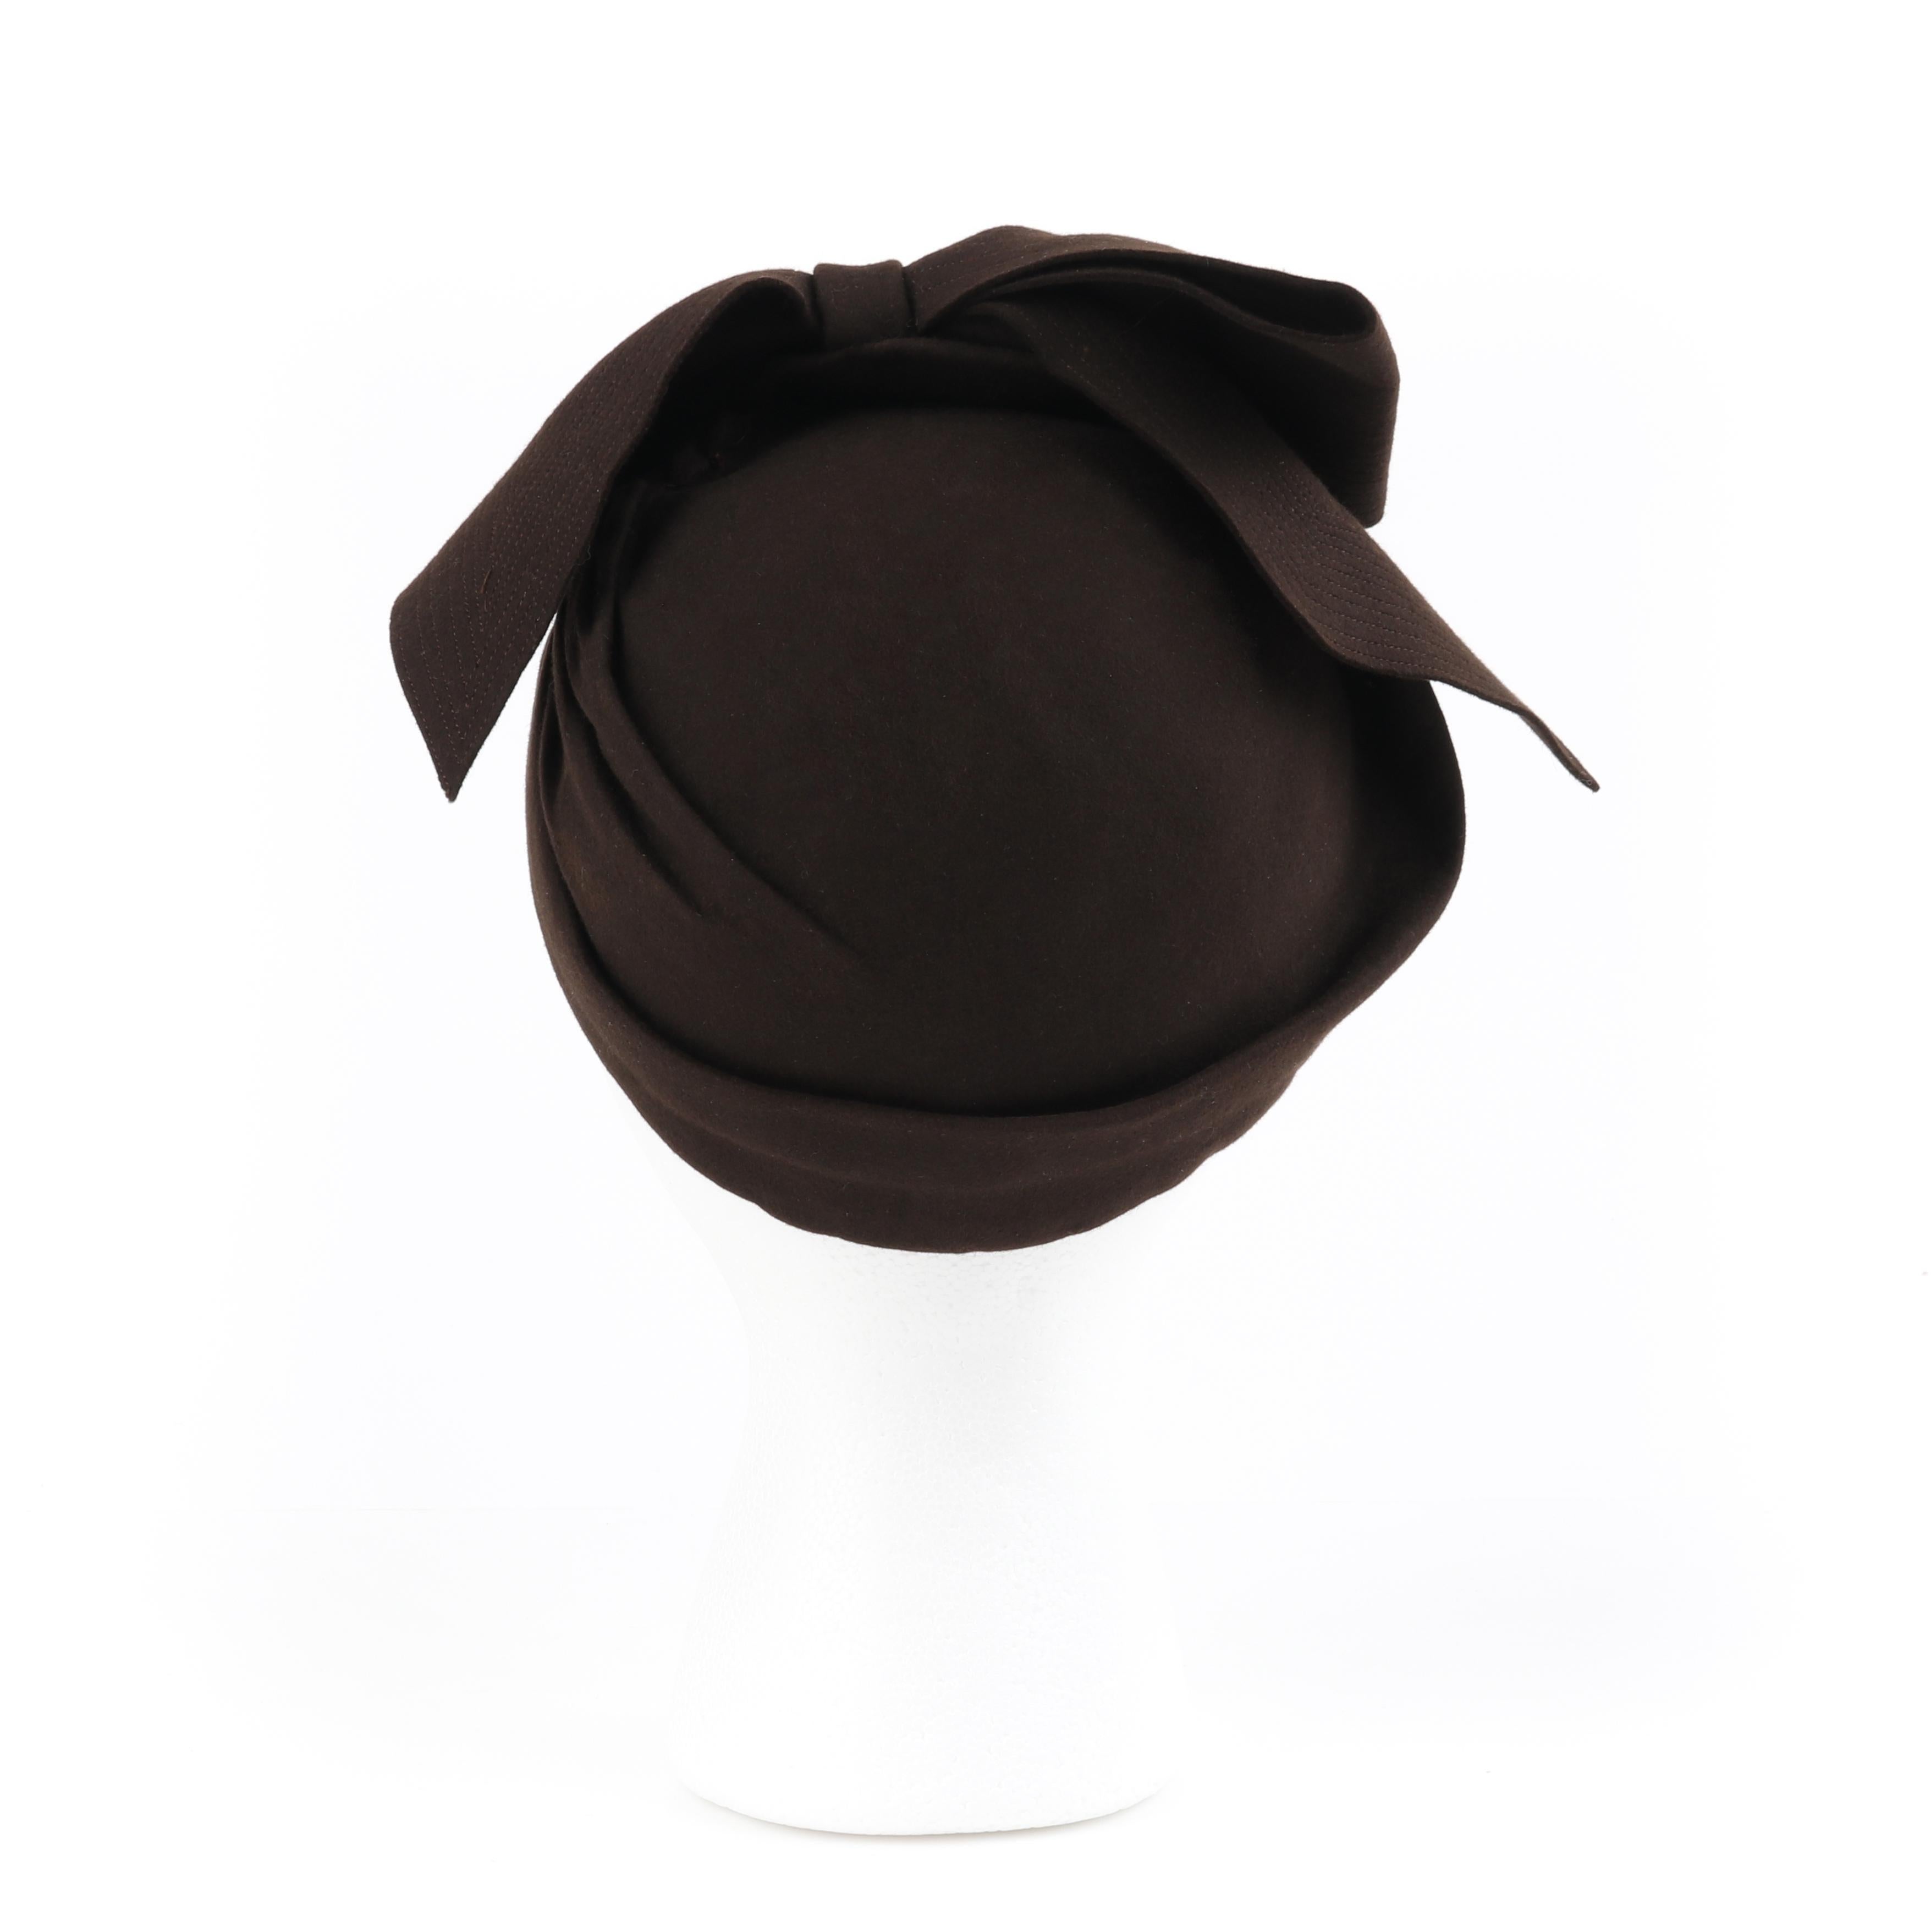 Black FLORENCE MILLINERY COUTURE c.1940s Chocolate Brown Felt Front Bow Turban Hat